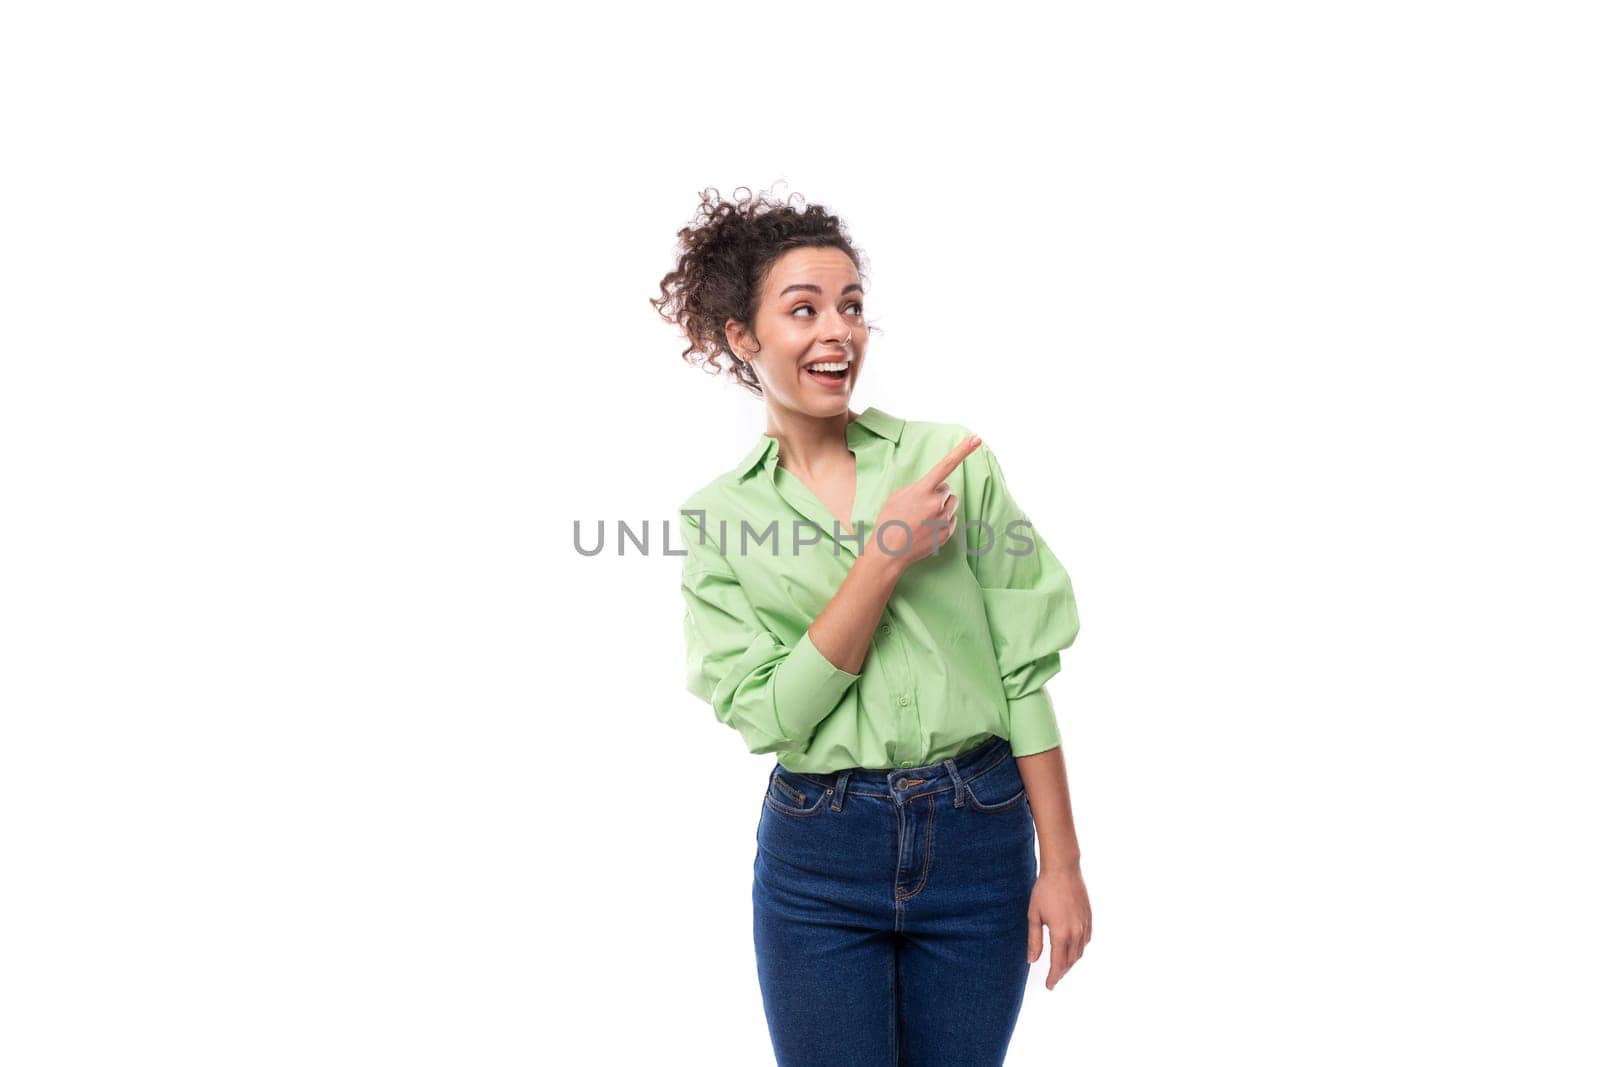 portrait of a young charming brunette businesswoman with curly hair gathered in a bun dressed in an office light green shirt on a white background with copy space.